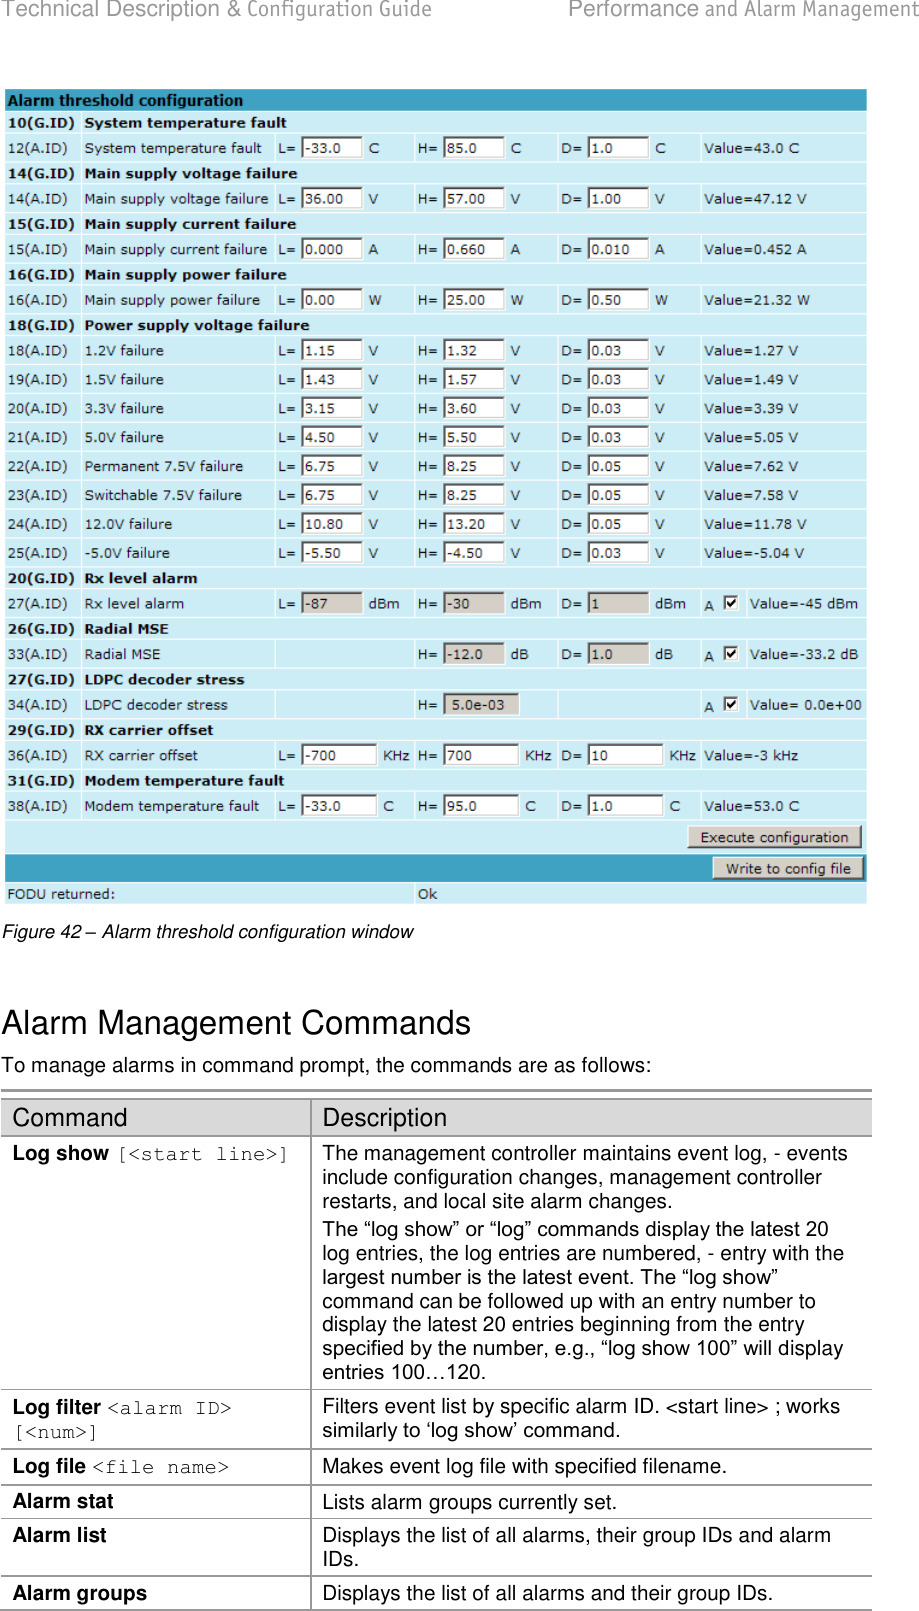 Technical Description &amp; Configuration Guide  Performance and Alarm Management  LigoWave  Page 64  Figure 42 – Alarm threshold configuration window  Alarm Management Commands To manage alarms in command prompt, the commands are as follows: Command Description Log show [&lt;start line&gt;] The management controller maintains event log, - events include configuration changes, management controller restarts, and local site alarm changes. log entries, the log entries are numbered, - entry with the command can be followed up with an entry number to display the latest 20 entries beginning from the entry isplay  Log filter &lt;alarm ID&gt; [&lt;num&gt;] Filters event list by specific alarm ID. &lt;start line&gt; ; works  Log file &lt;file name&gt; Makes event log file with specified filename. Alarm stat Lists alarm groups currently set. Alarm list Displays the list of all alarms, their group IDs and alarm IDs. Alarm groups Displays the list of all alarms and their group IDs. 